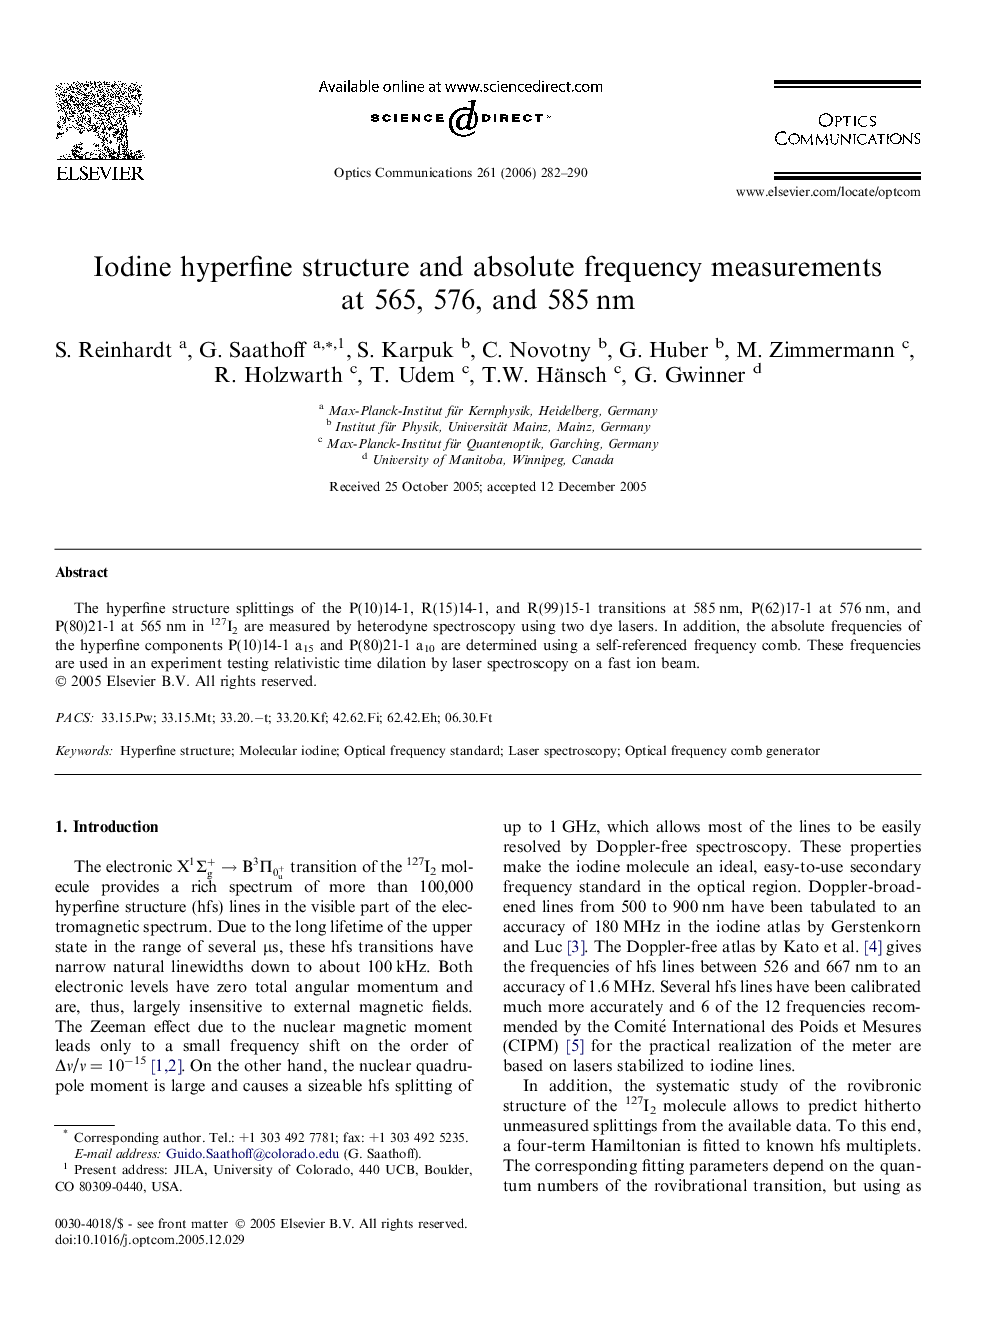 Iodine hyperfine structure and absolute frequency measurements at 565, 576, and 585 nm